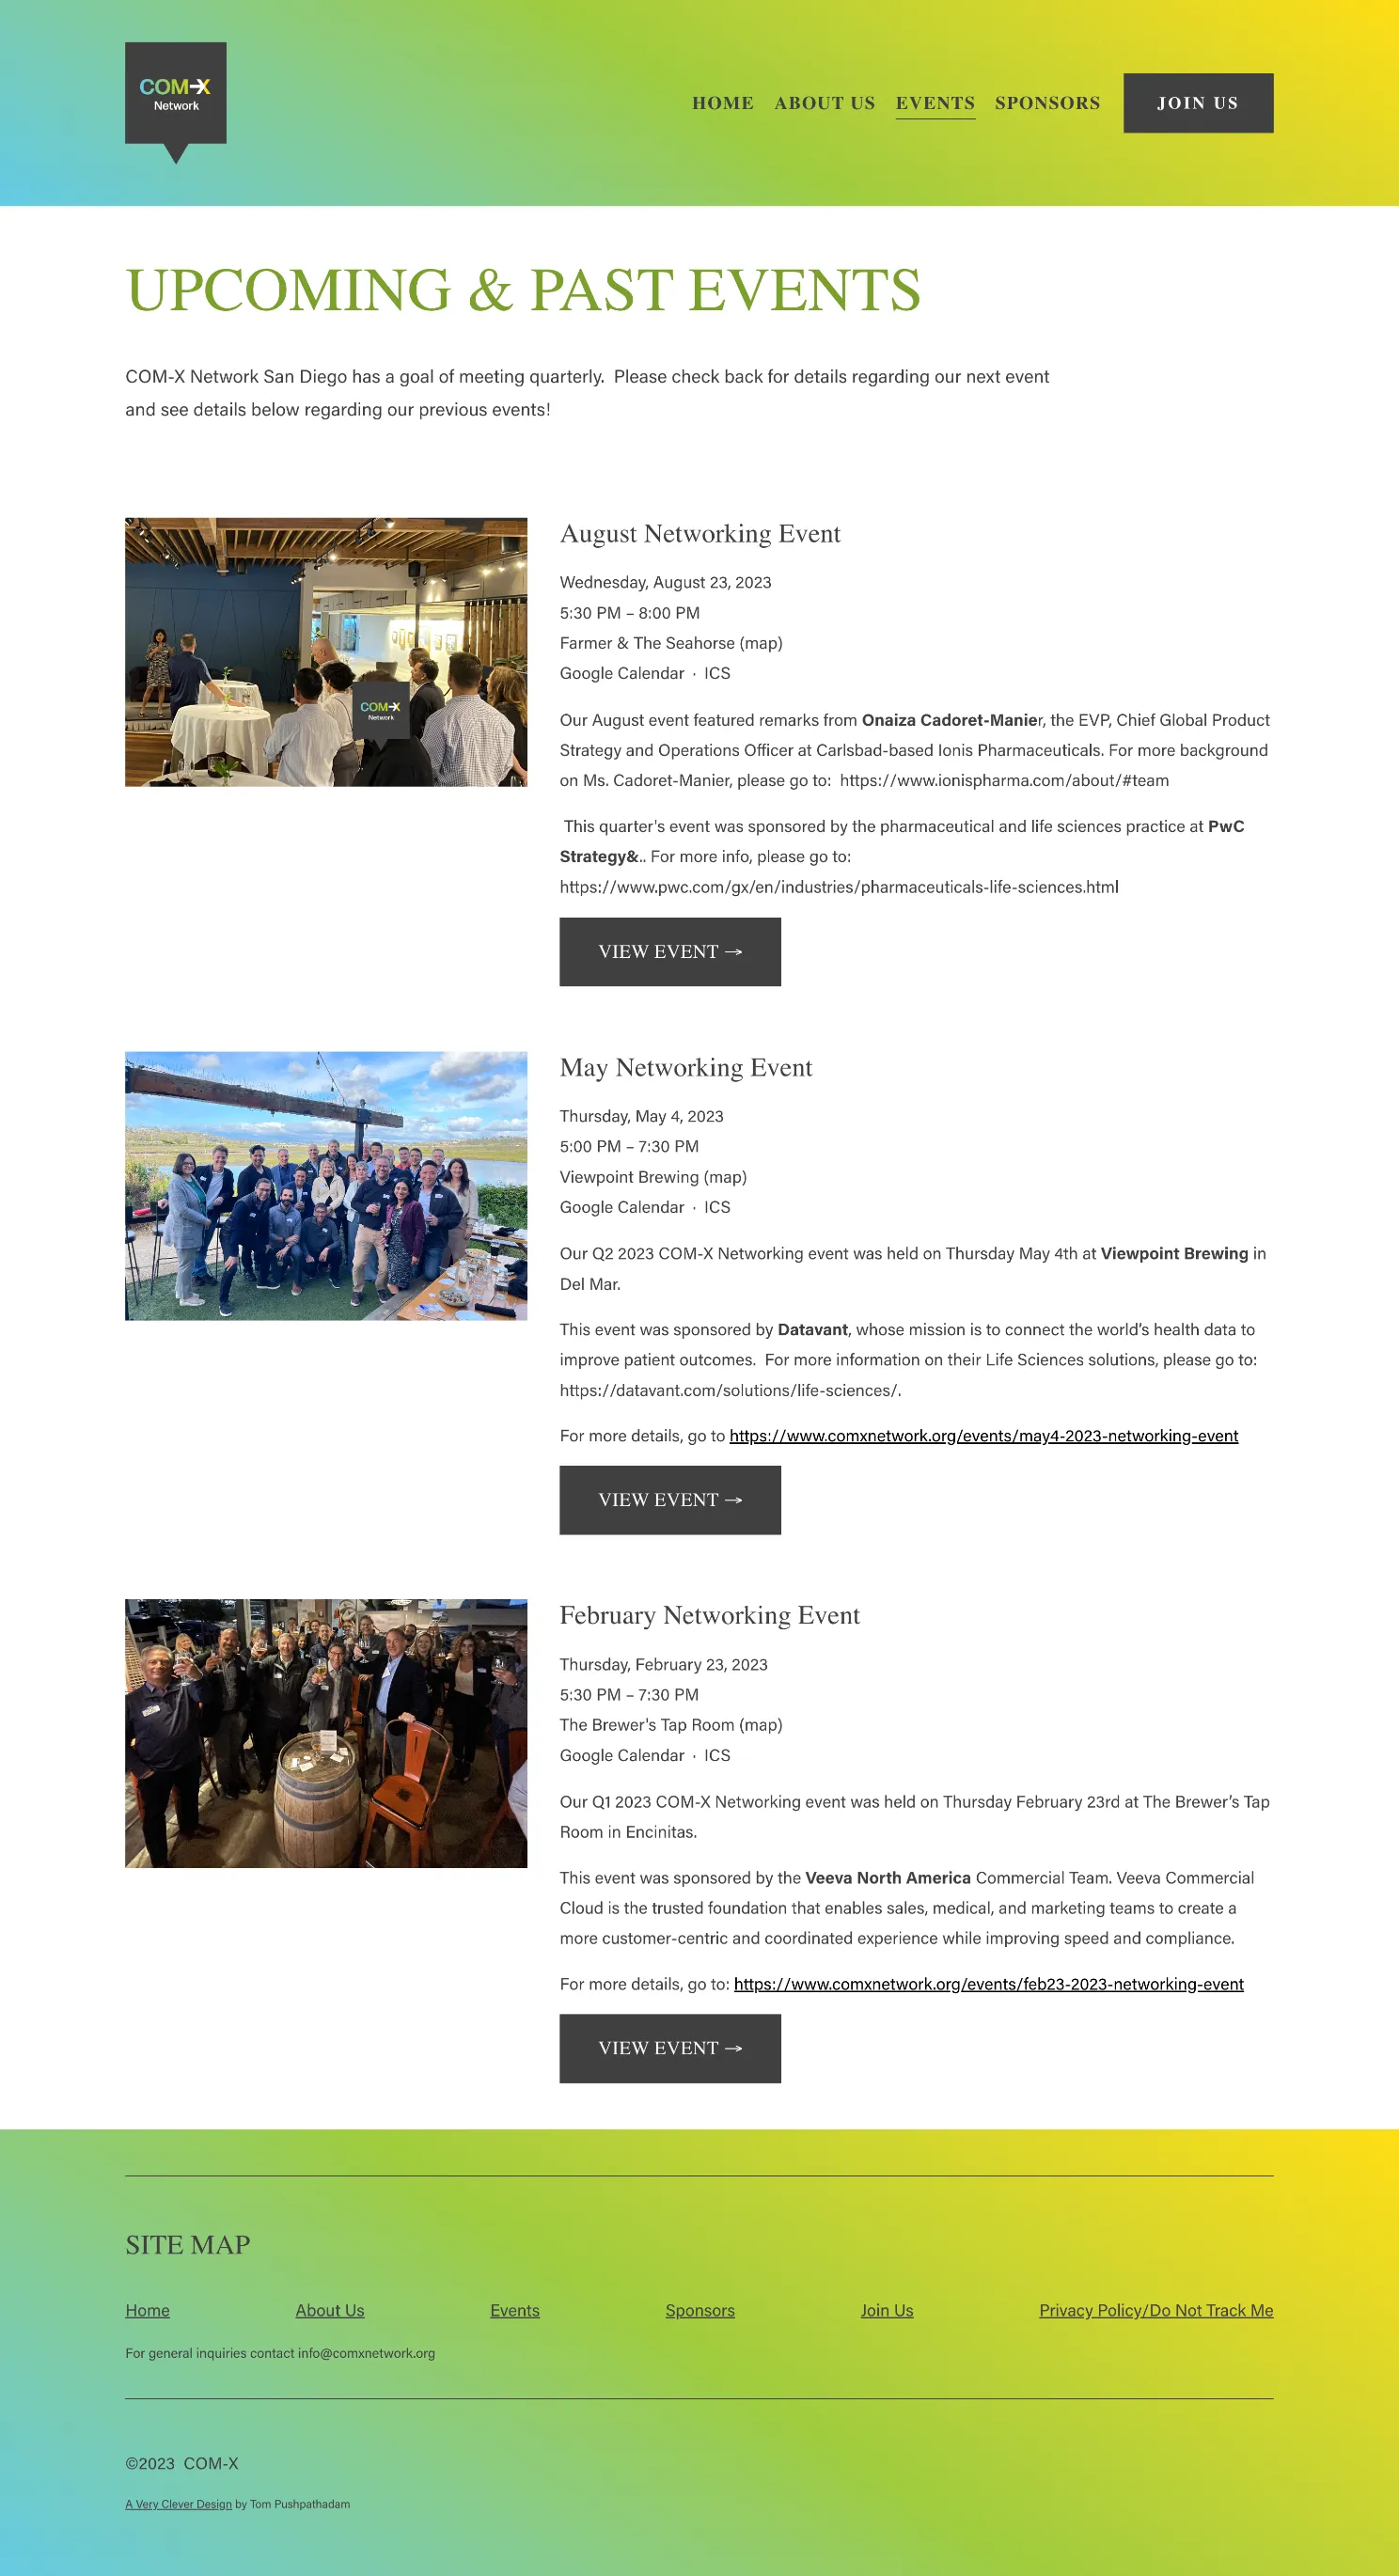 Screenshot of the website's event page showing a sample photo, time, location and summary description for several upcoming and past events.